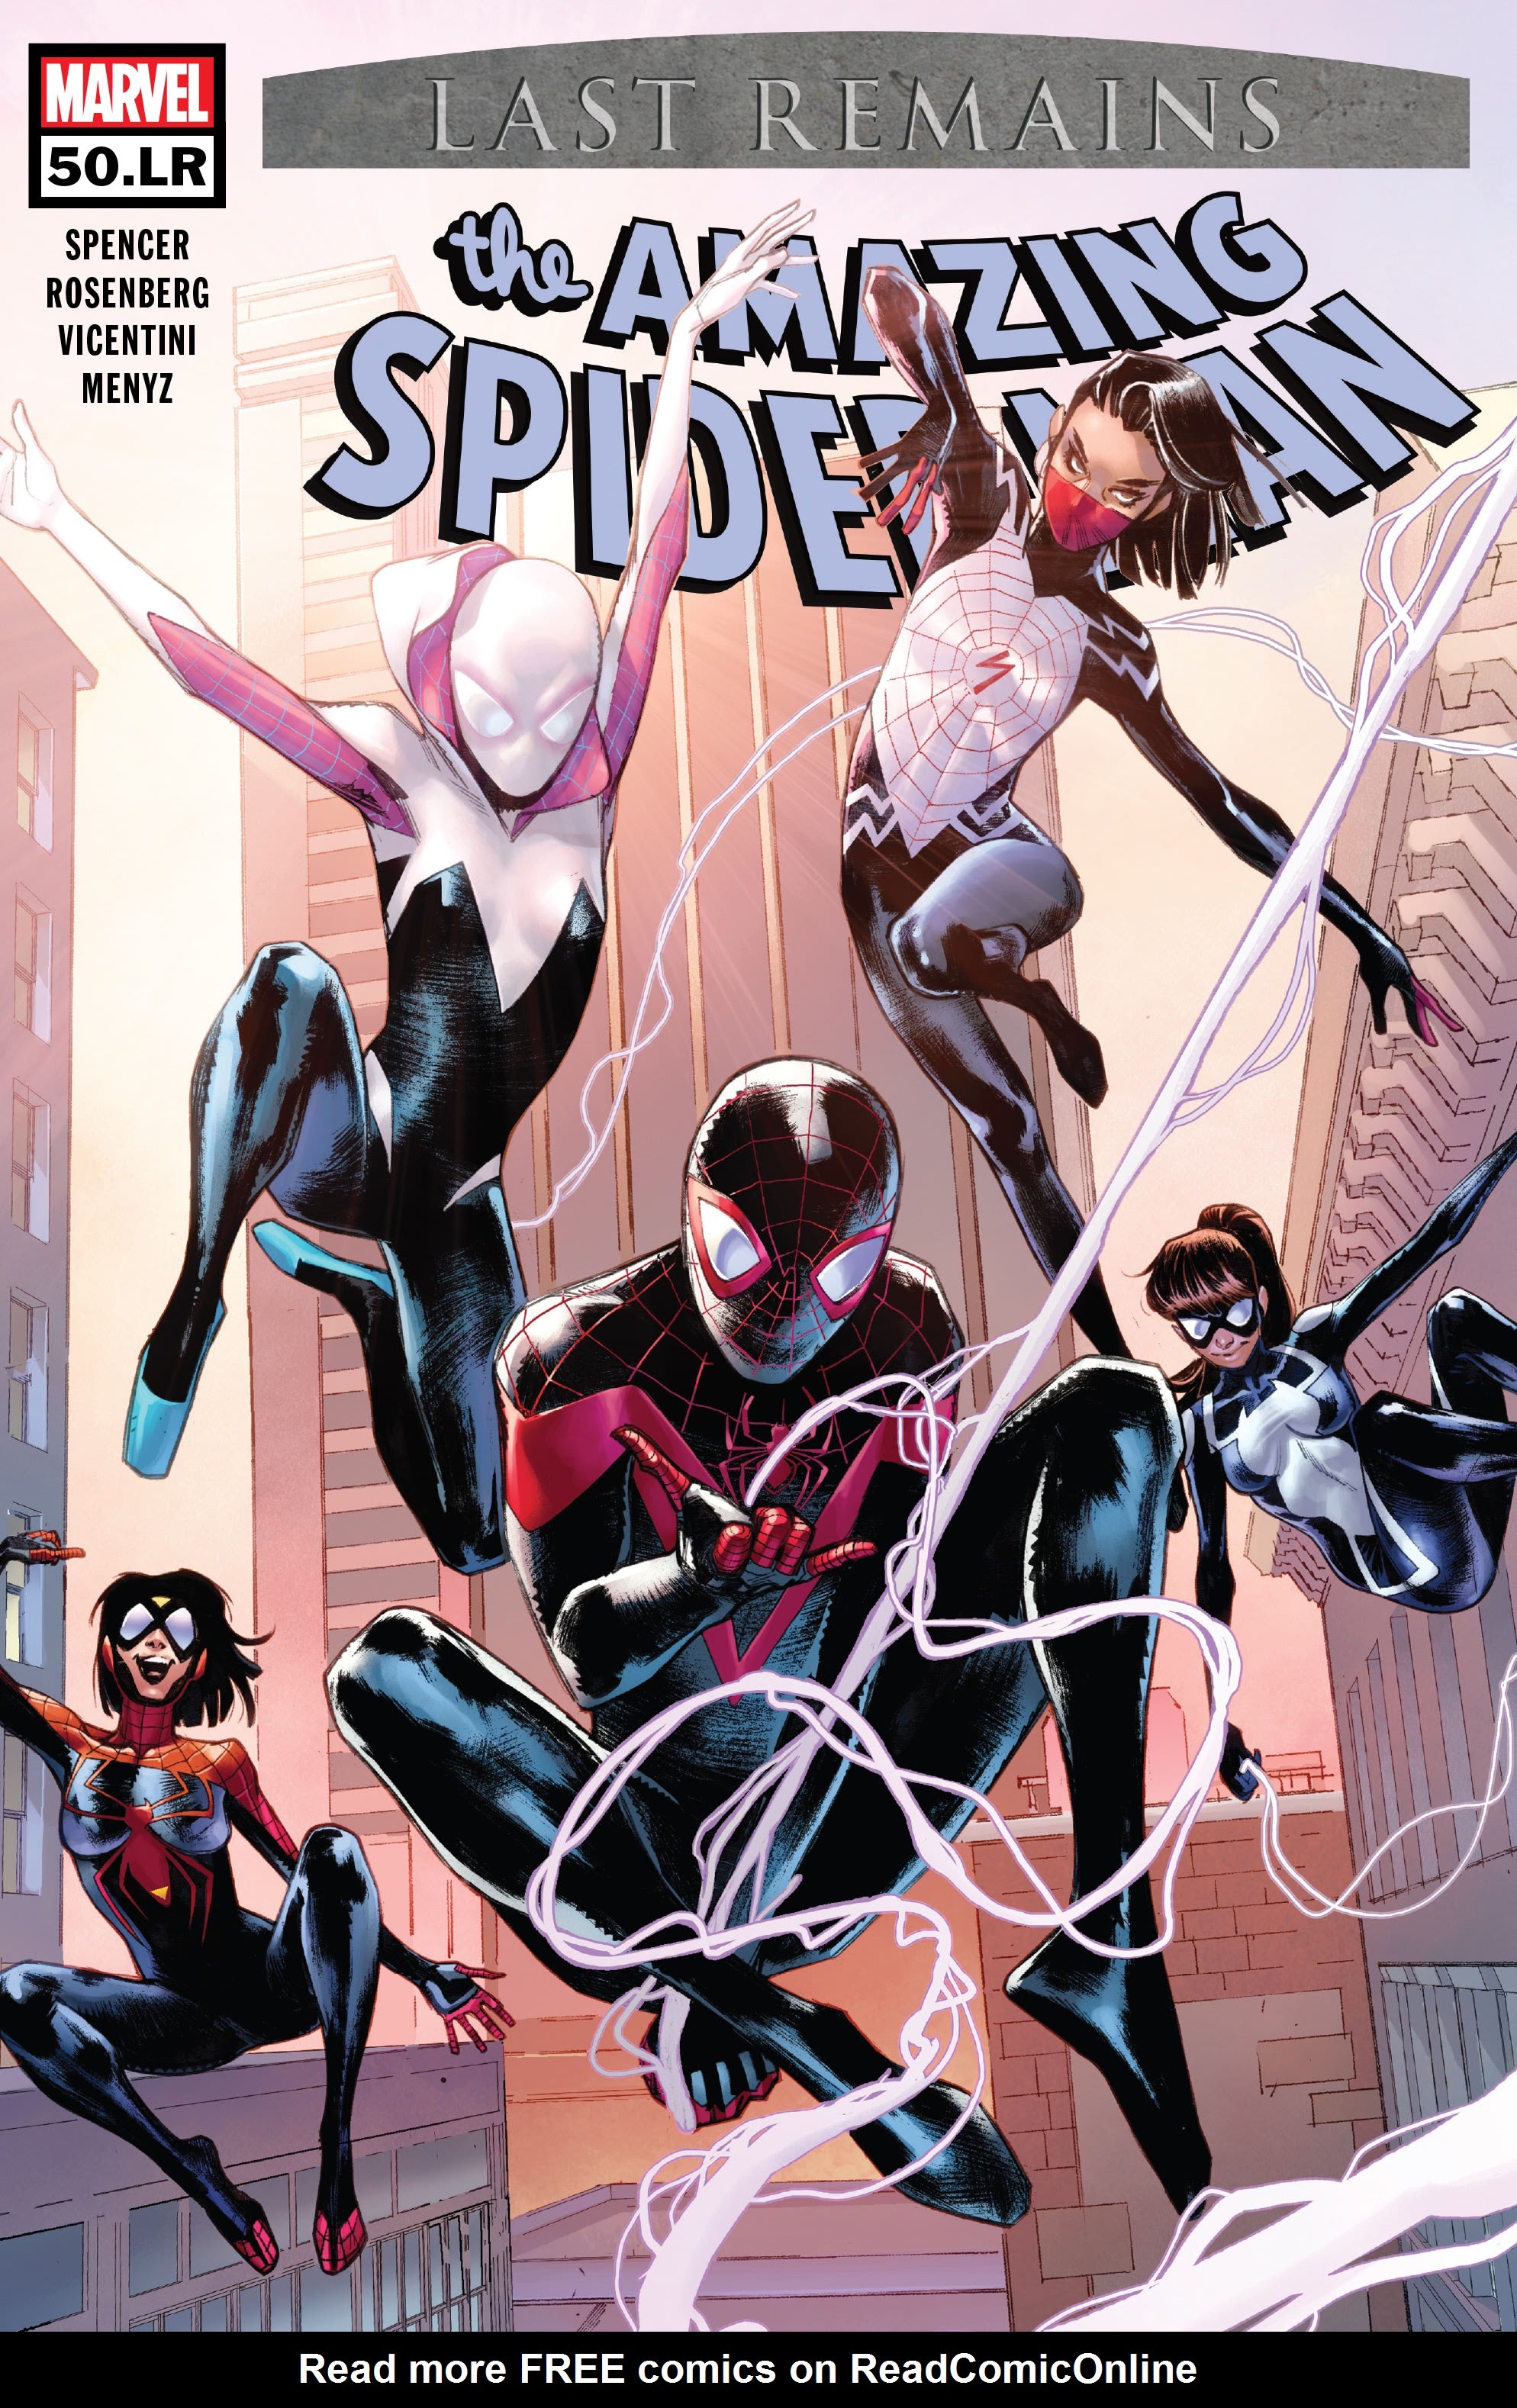 Read online The Amazing Spider-Man (2018) comic -  Issue #50.LR - 1